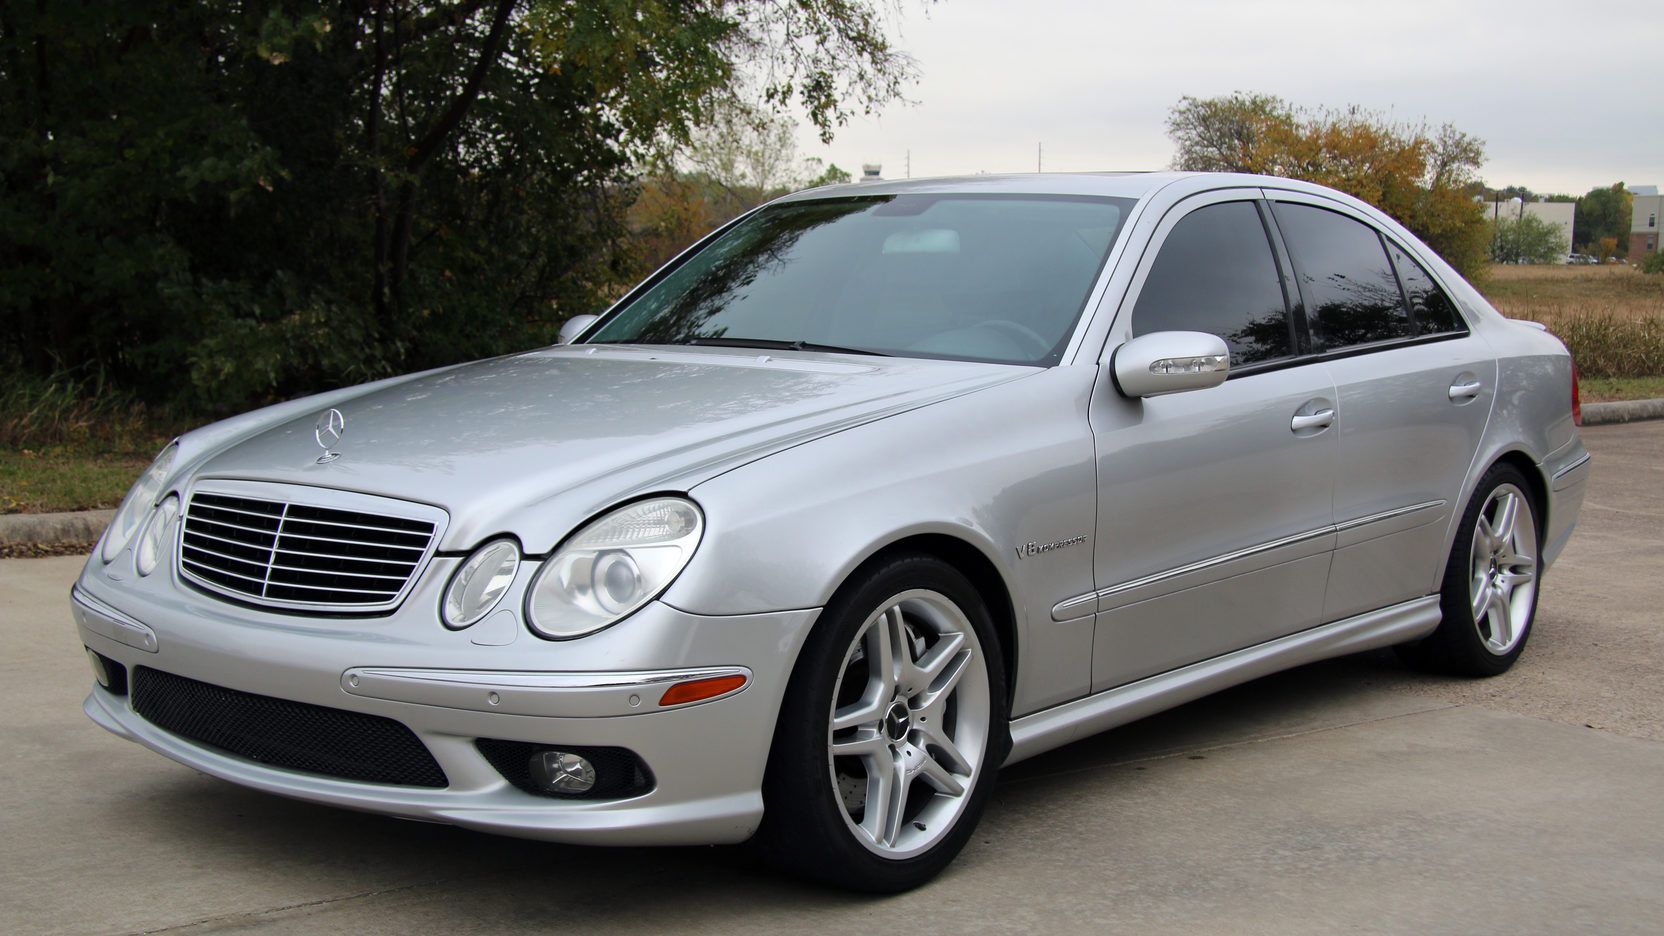 Silver Mercedes-Benz E55 AMG on the driveway